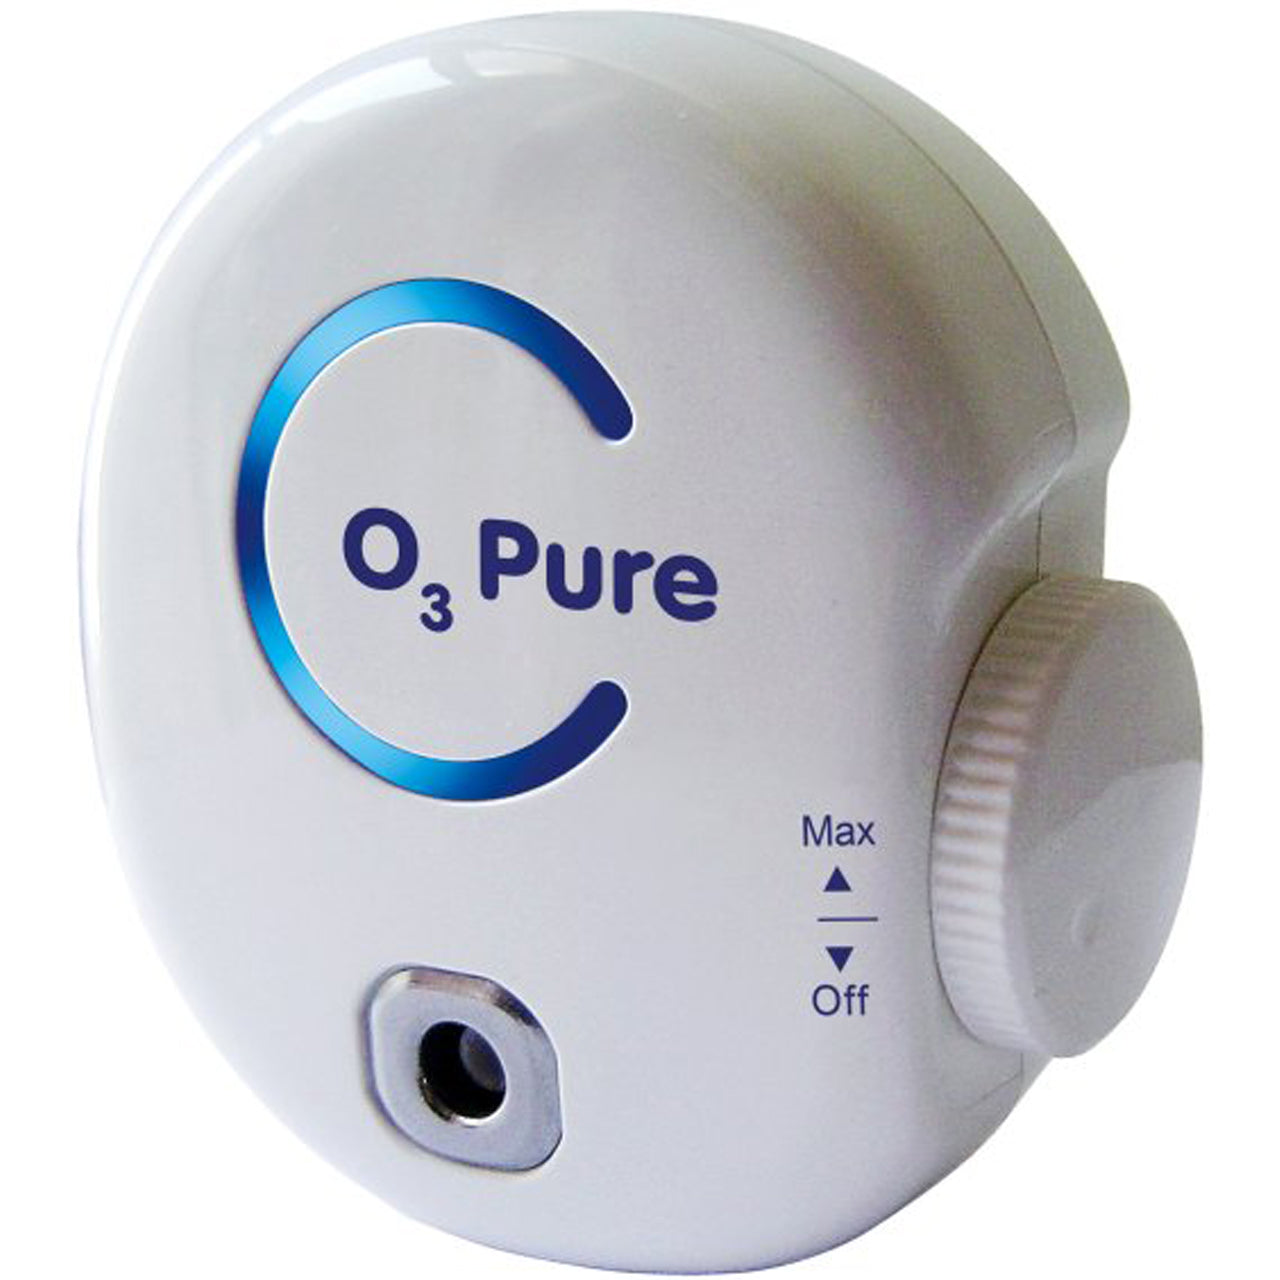 O3 PURE AAP 50 Plug-In Adjustable Air Purifier